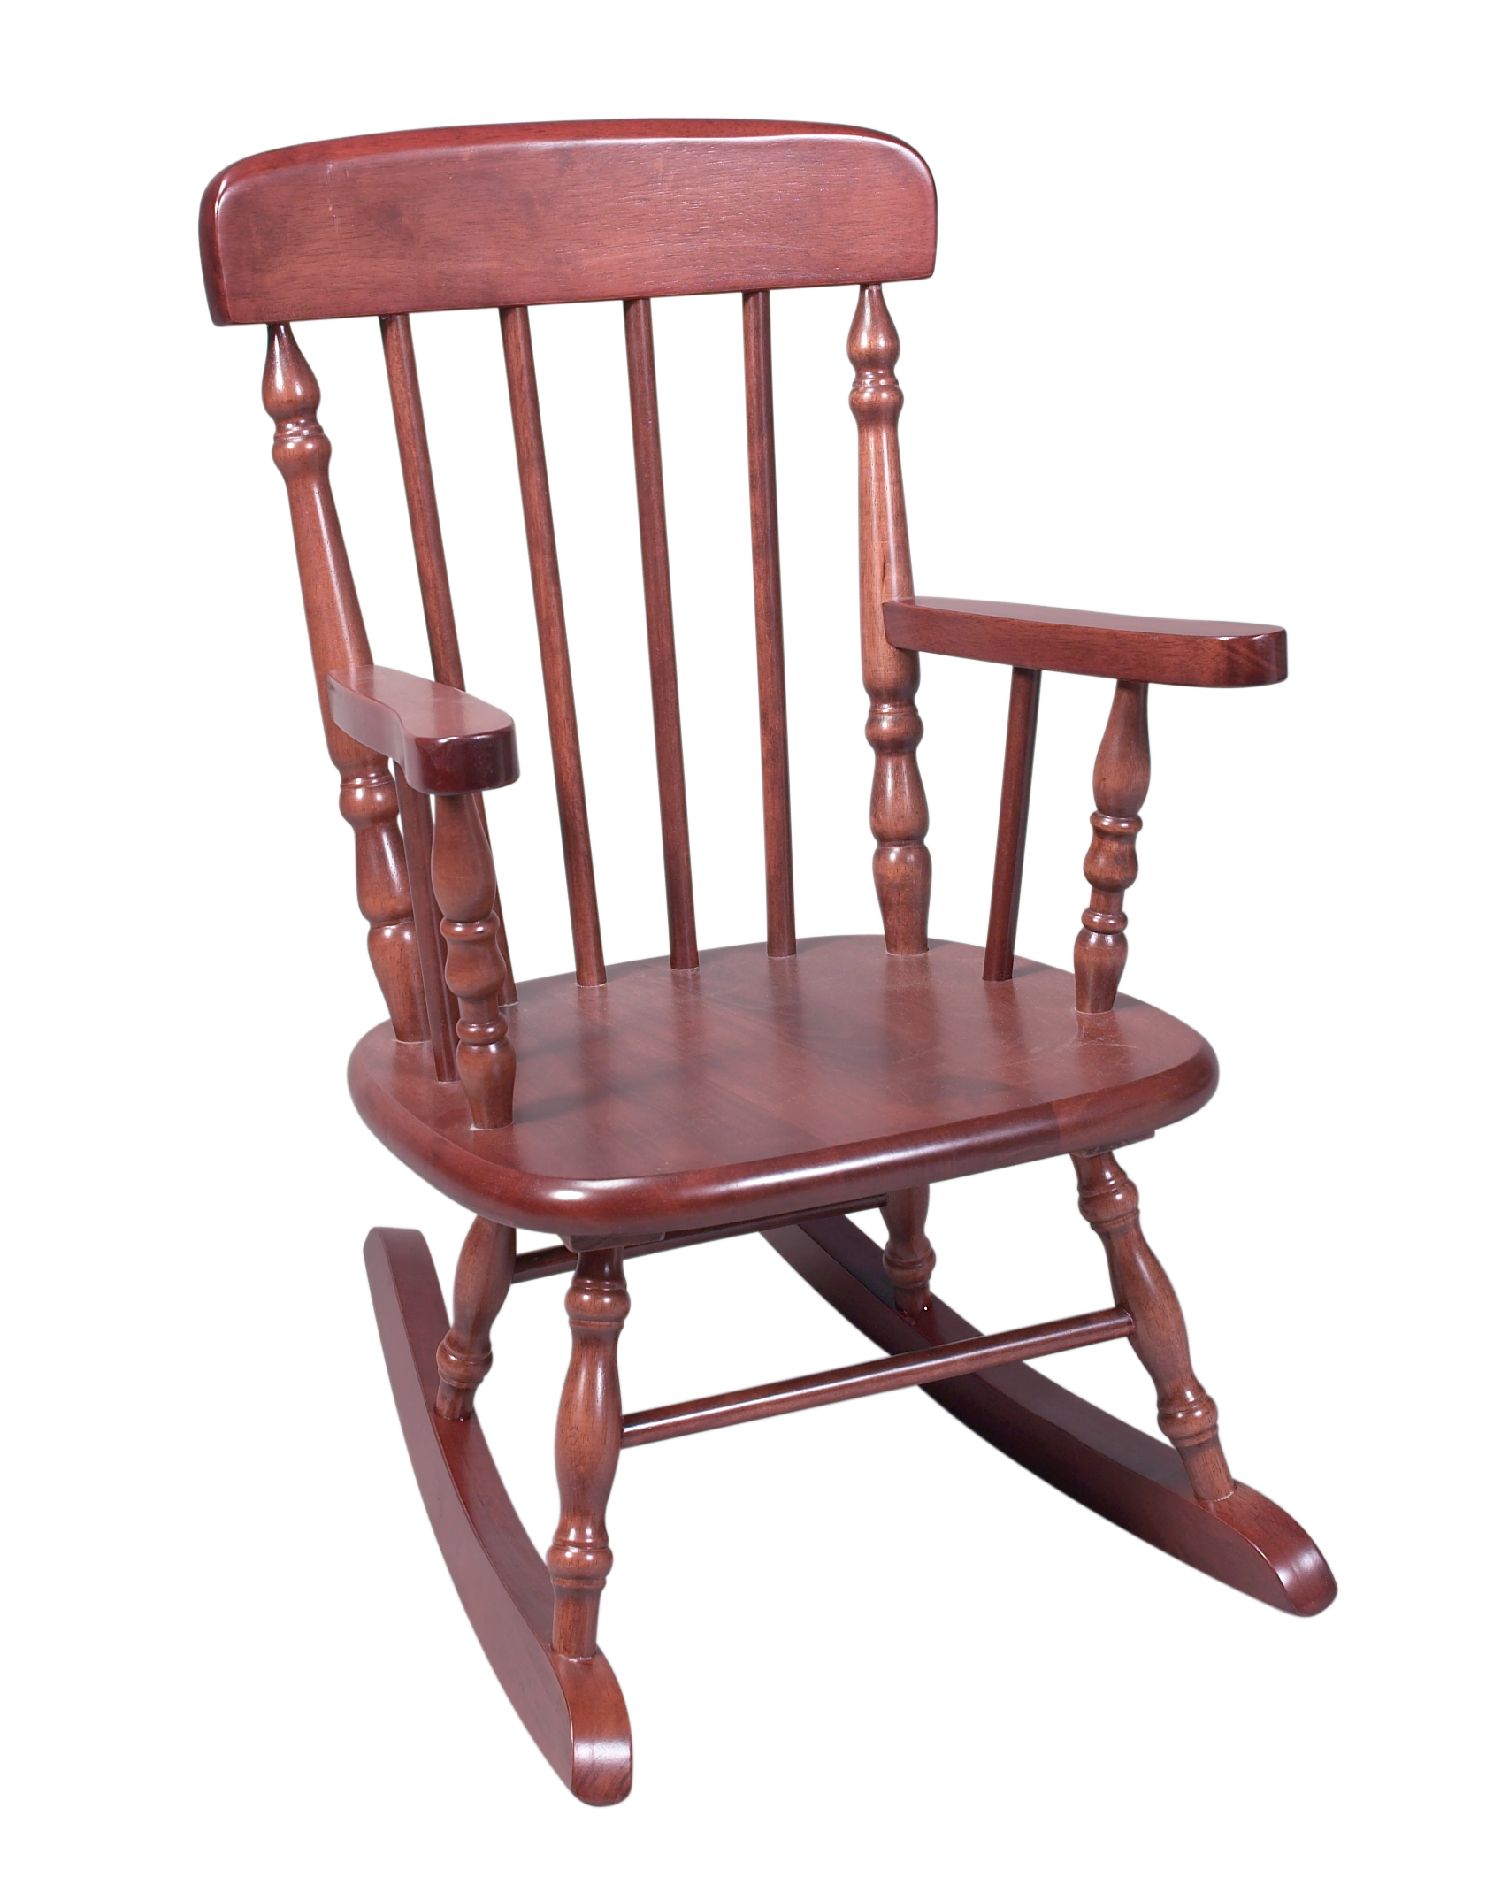 1410C Deluxe Child's Spindle Rocking Chair - Cherry